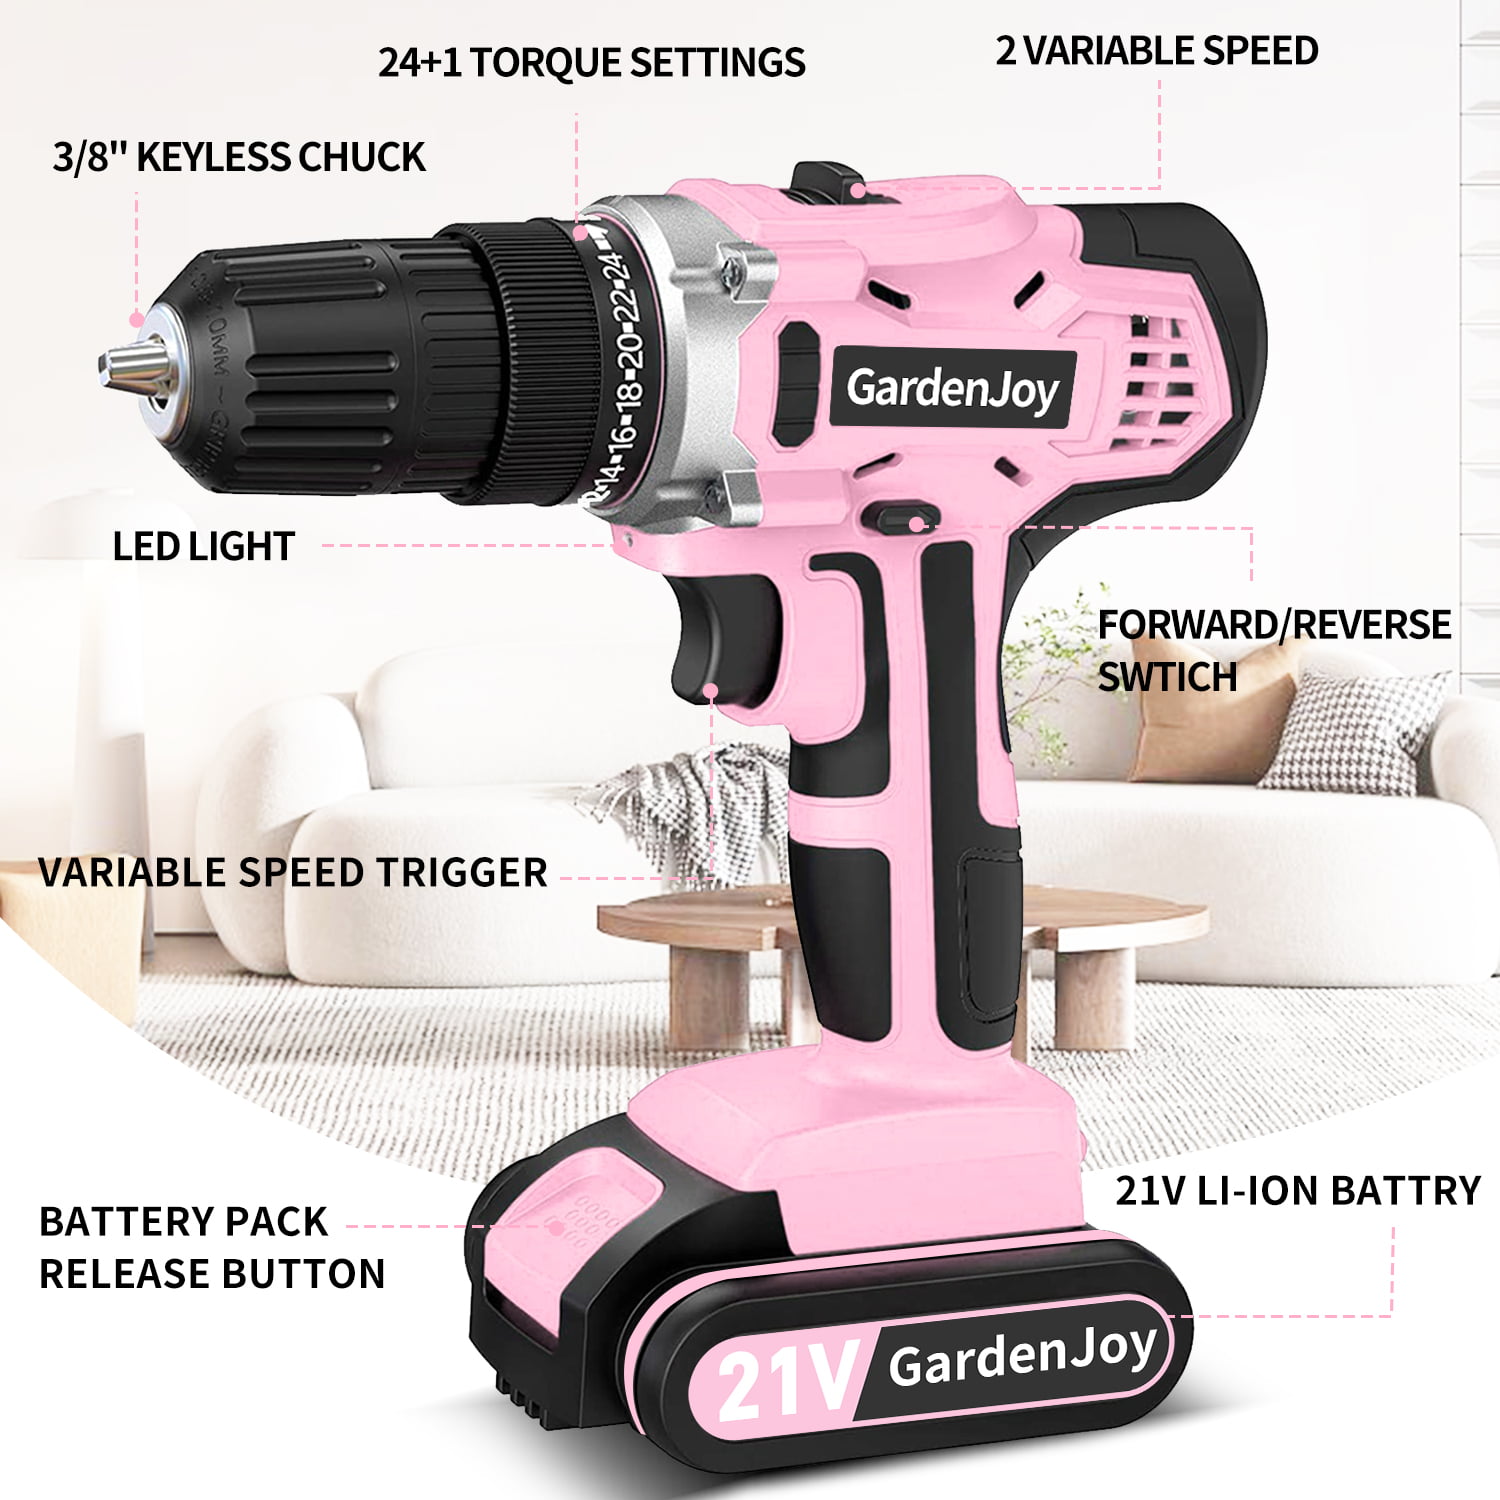 GardenJoy Cordless Power Drill Set: 12V Electric Drill with Battery and  Charger, 2 Variable Speed, 24+1 Torque Setting, 3/8-Inch Keyless Chuck